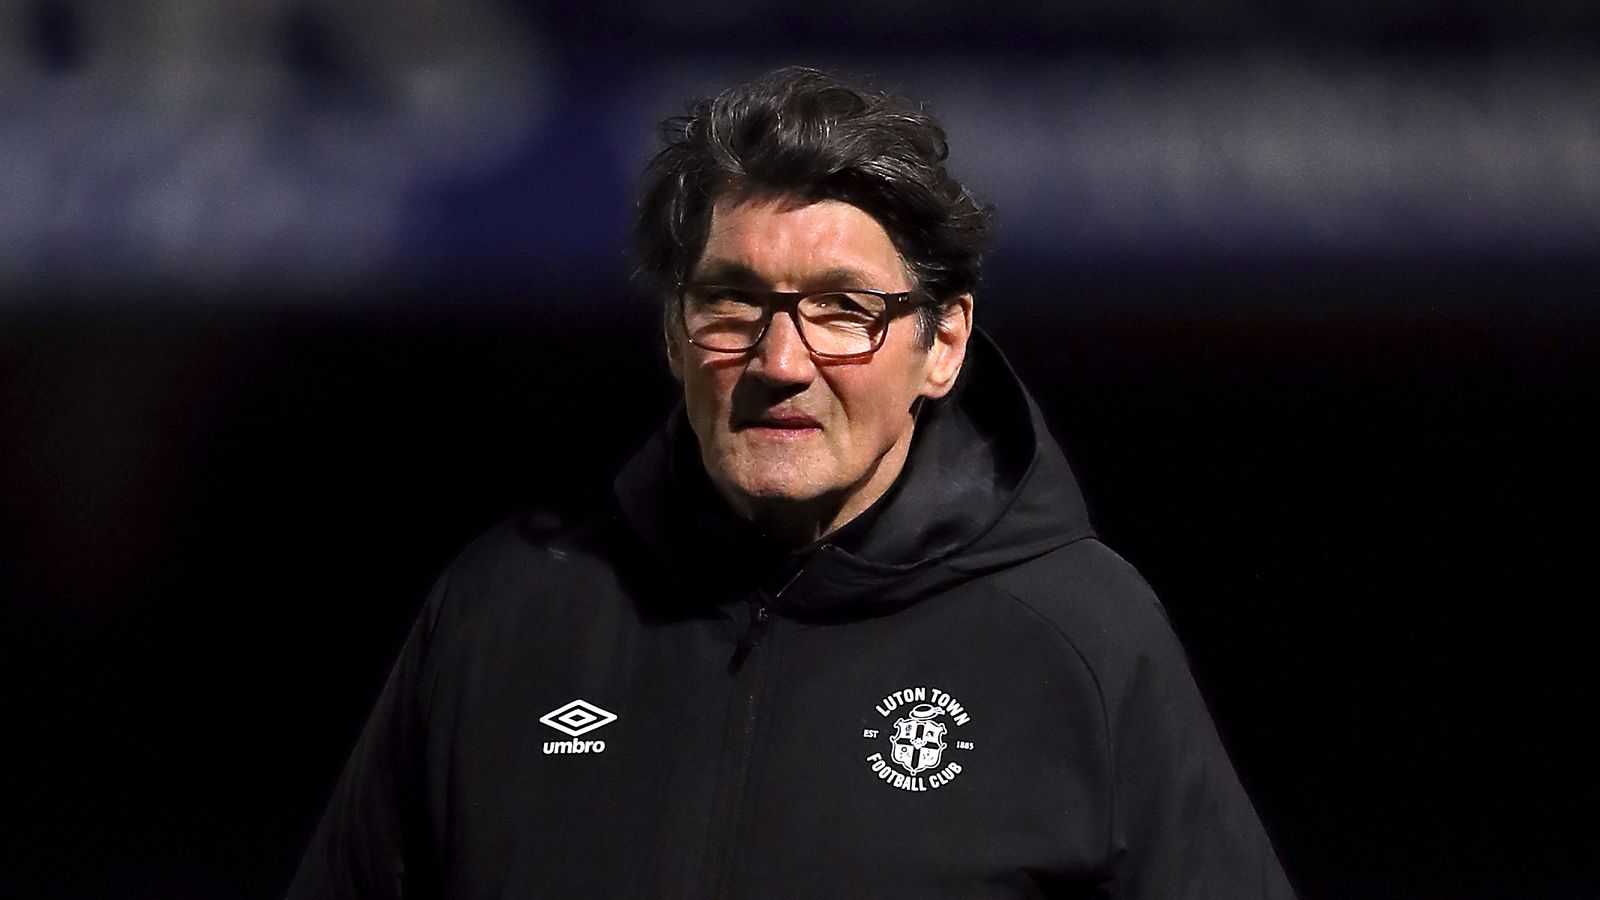 Mick Harford: Luton Town legend urges men to get prostate checks following his own cancer diagnosis